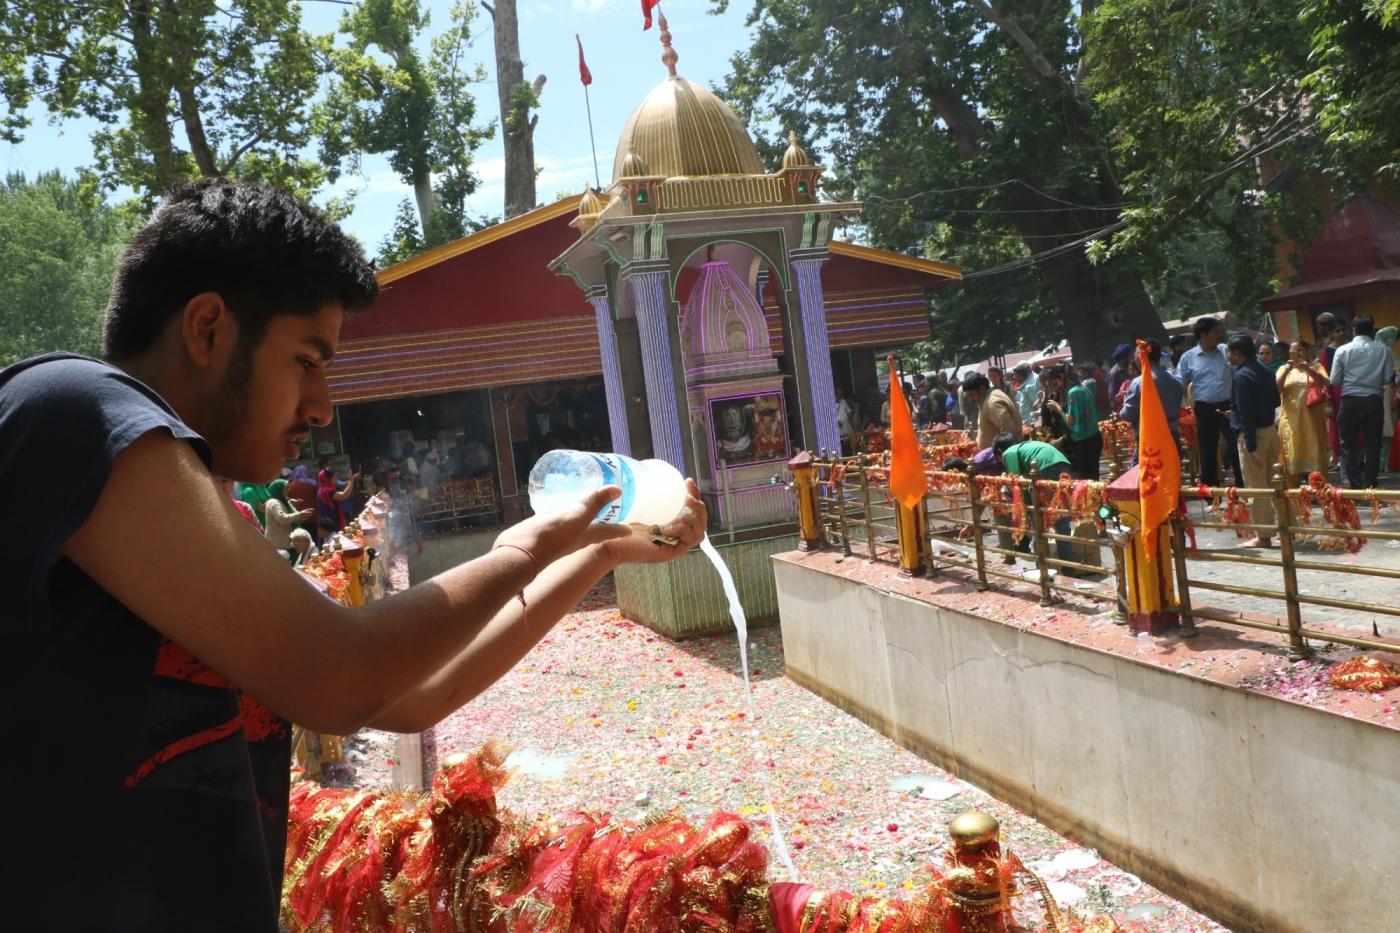 Srinagar: A devotee performs rituals during Kheer Bhawani Mela at Mata Kheer Bhawani Shrine in Jammu and Kashmir's Ganderbal district on June 20, 2018. Kashmiri Pandits started arriving here on Wednesday to pray for peace and prosperity at the shrine that is is dedicated to Hindu deity Mata Ragnya, who according to Hindu beliefs came to Kashmir from Sri Lanka during the rule of Ravana and is considered to be the holiest Kashmiri Pandit shrine in Kashmir Valley. (Photo: IANS) by .